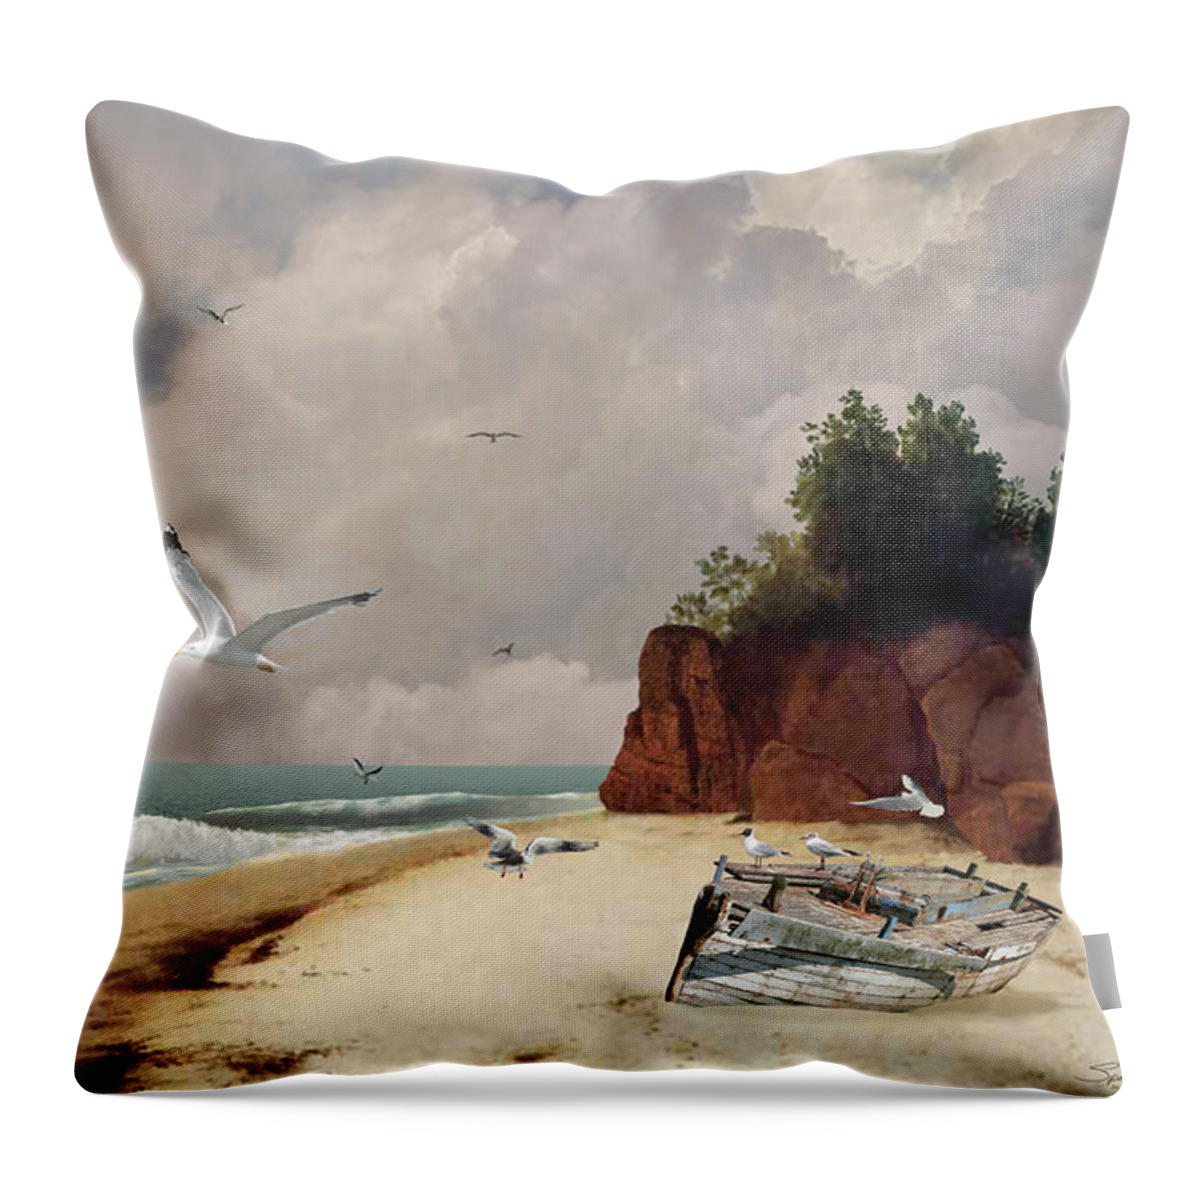 Seaside Throw Pillow featuring the digital art Somewhere By The Shore by M Spadecaller